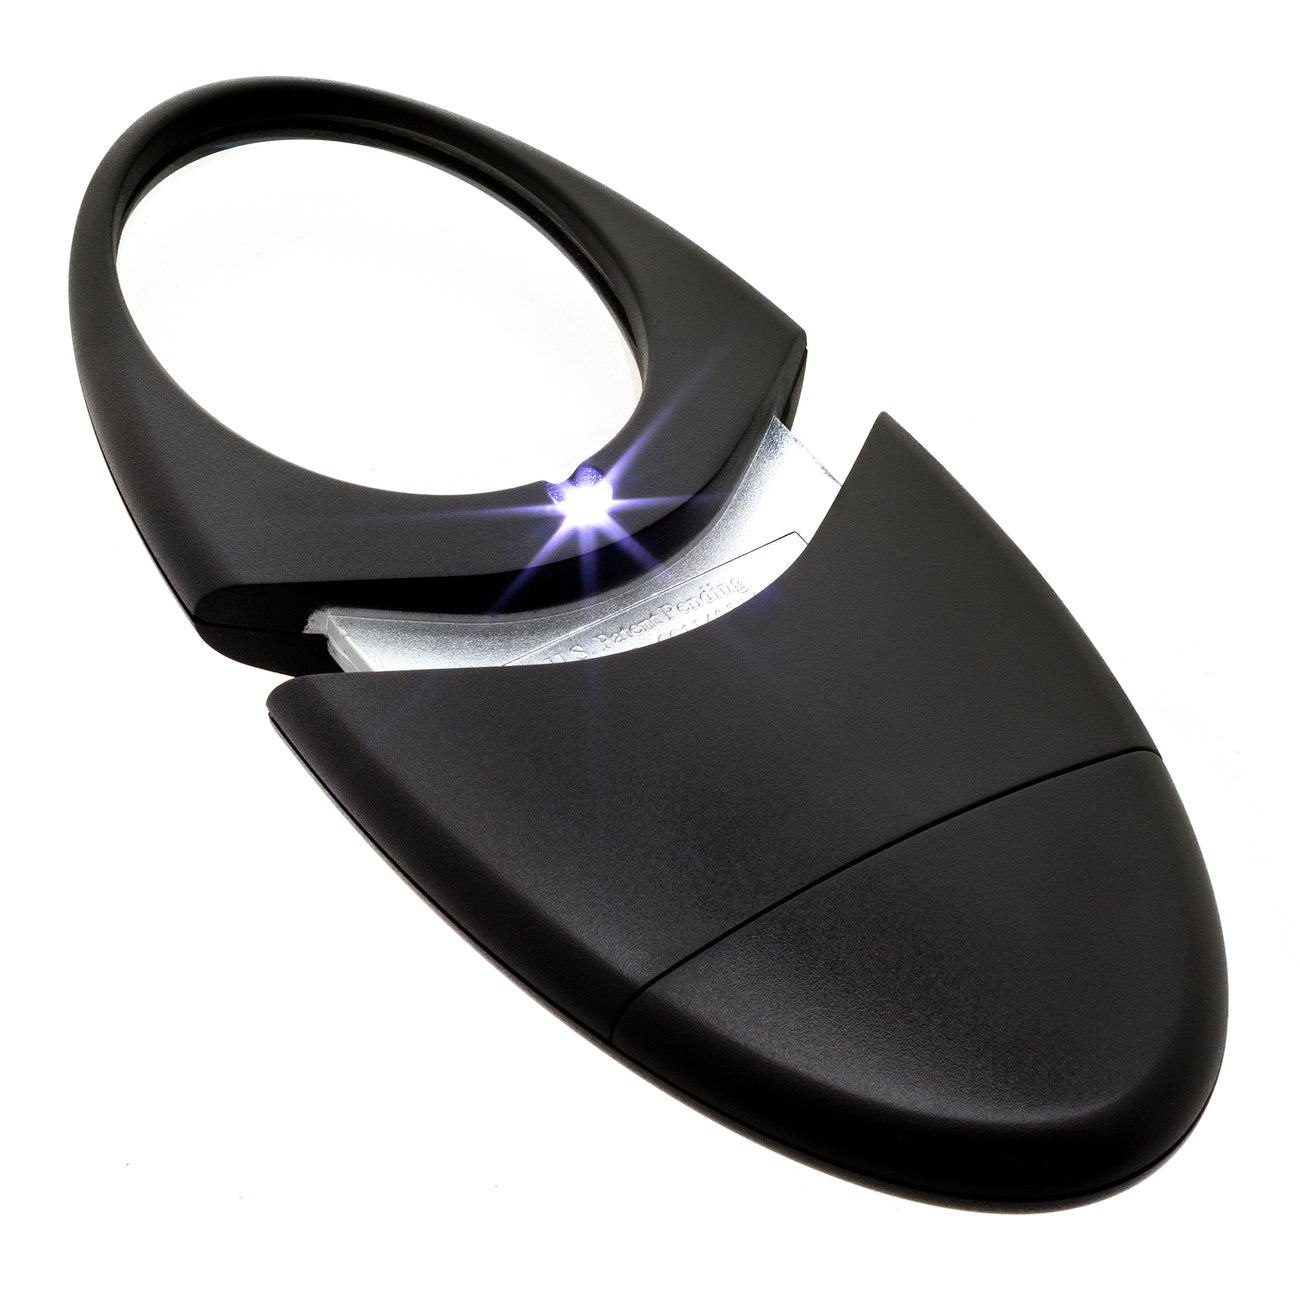 Lighted Oval Travel Magnifier